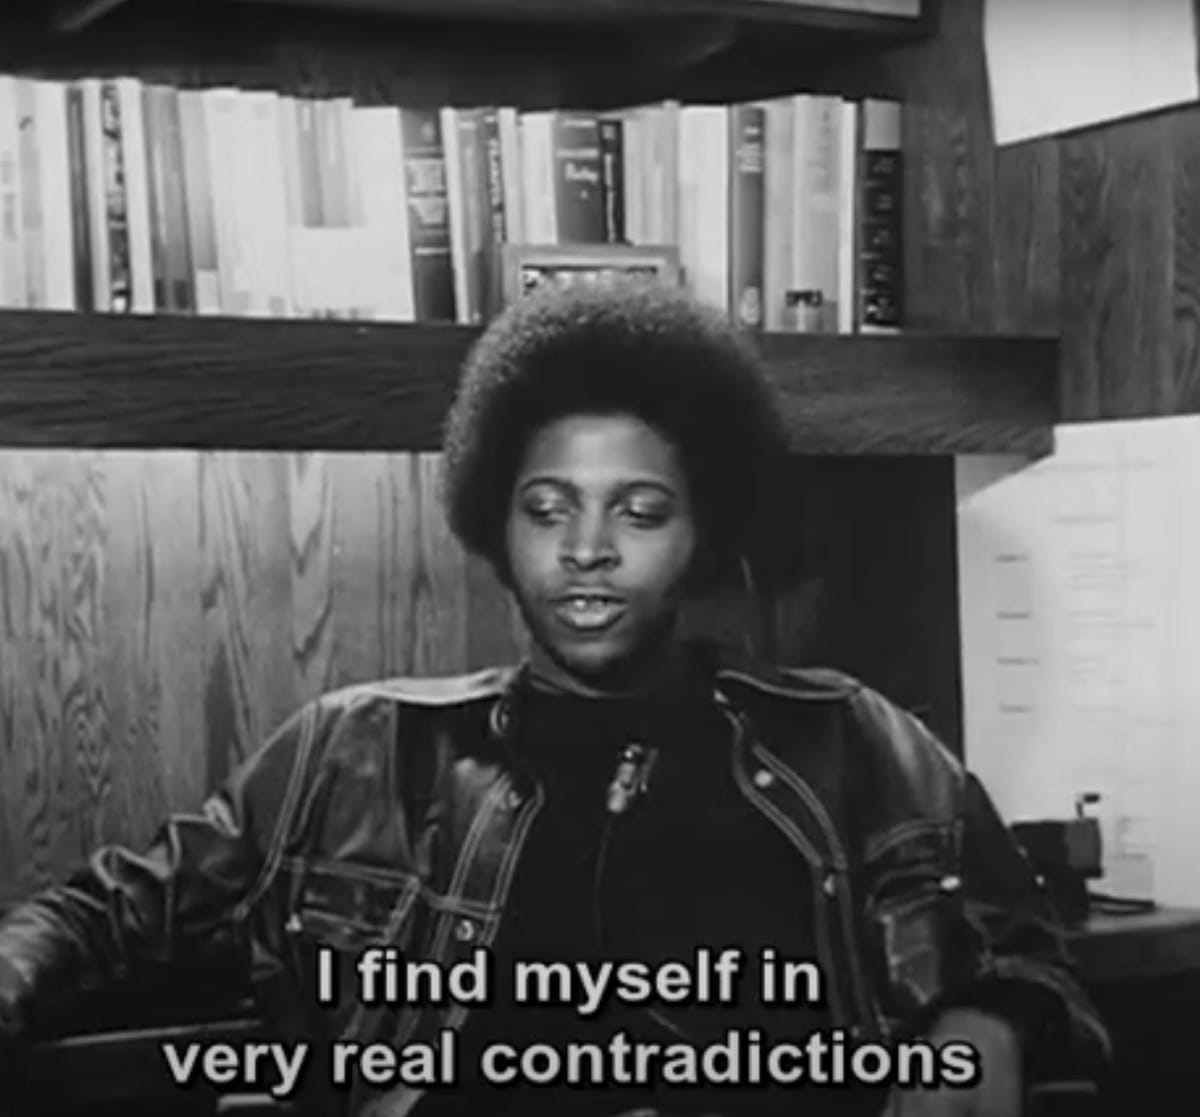 Two Good Films: "Black At Yale" and "Street Corner Stories"